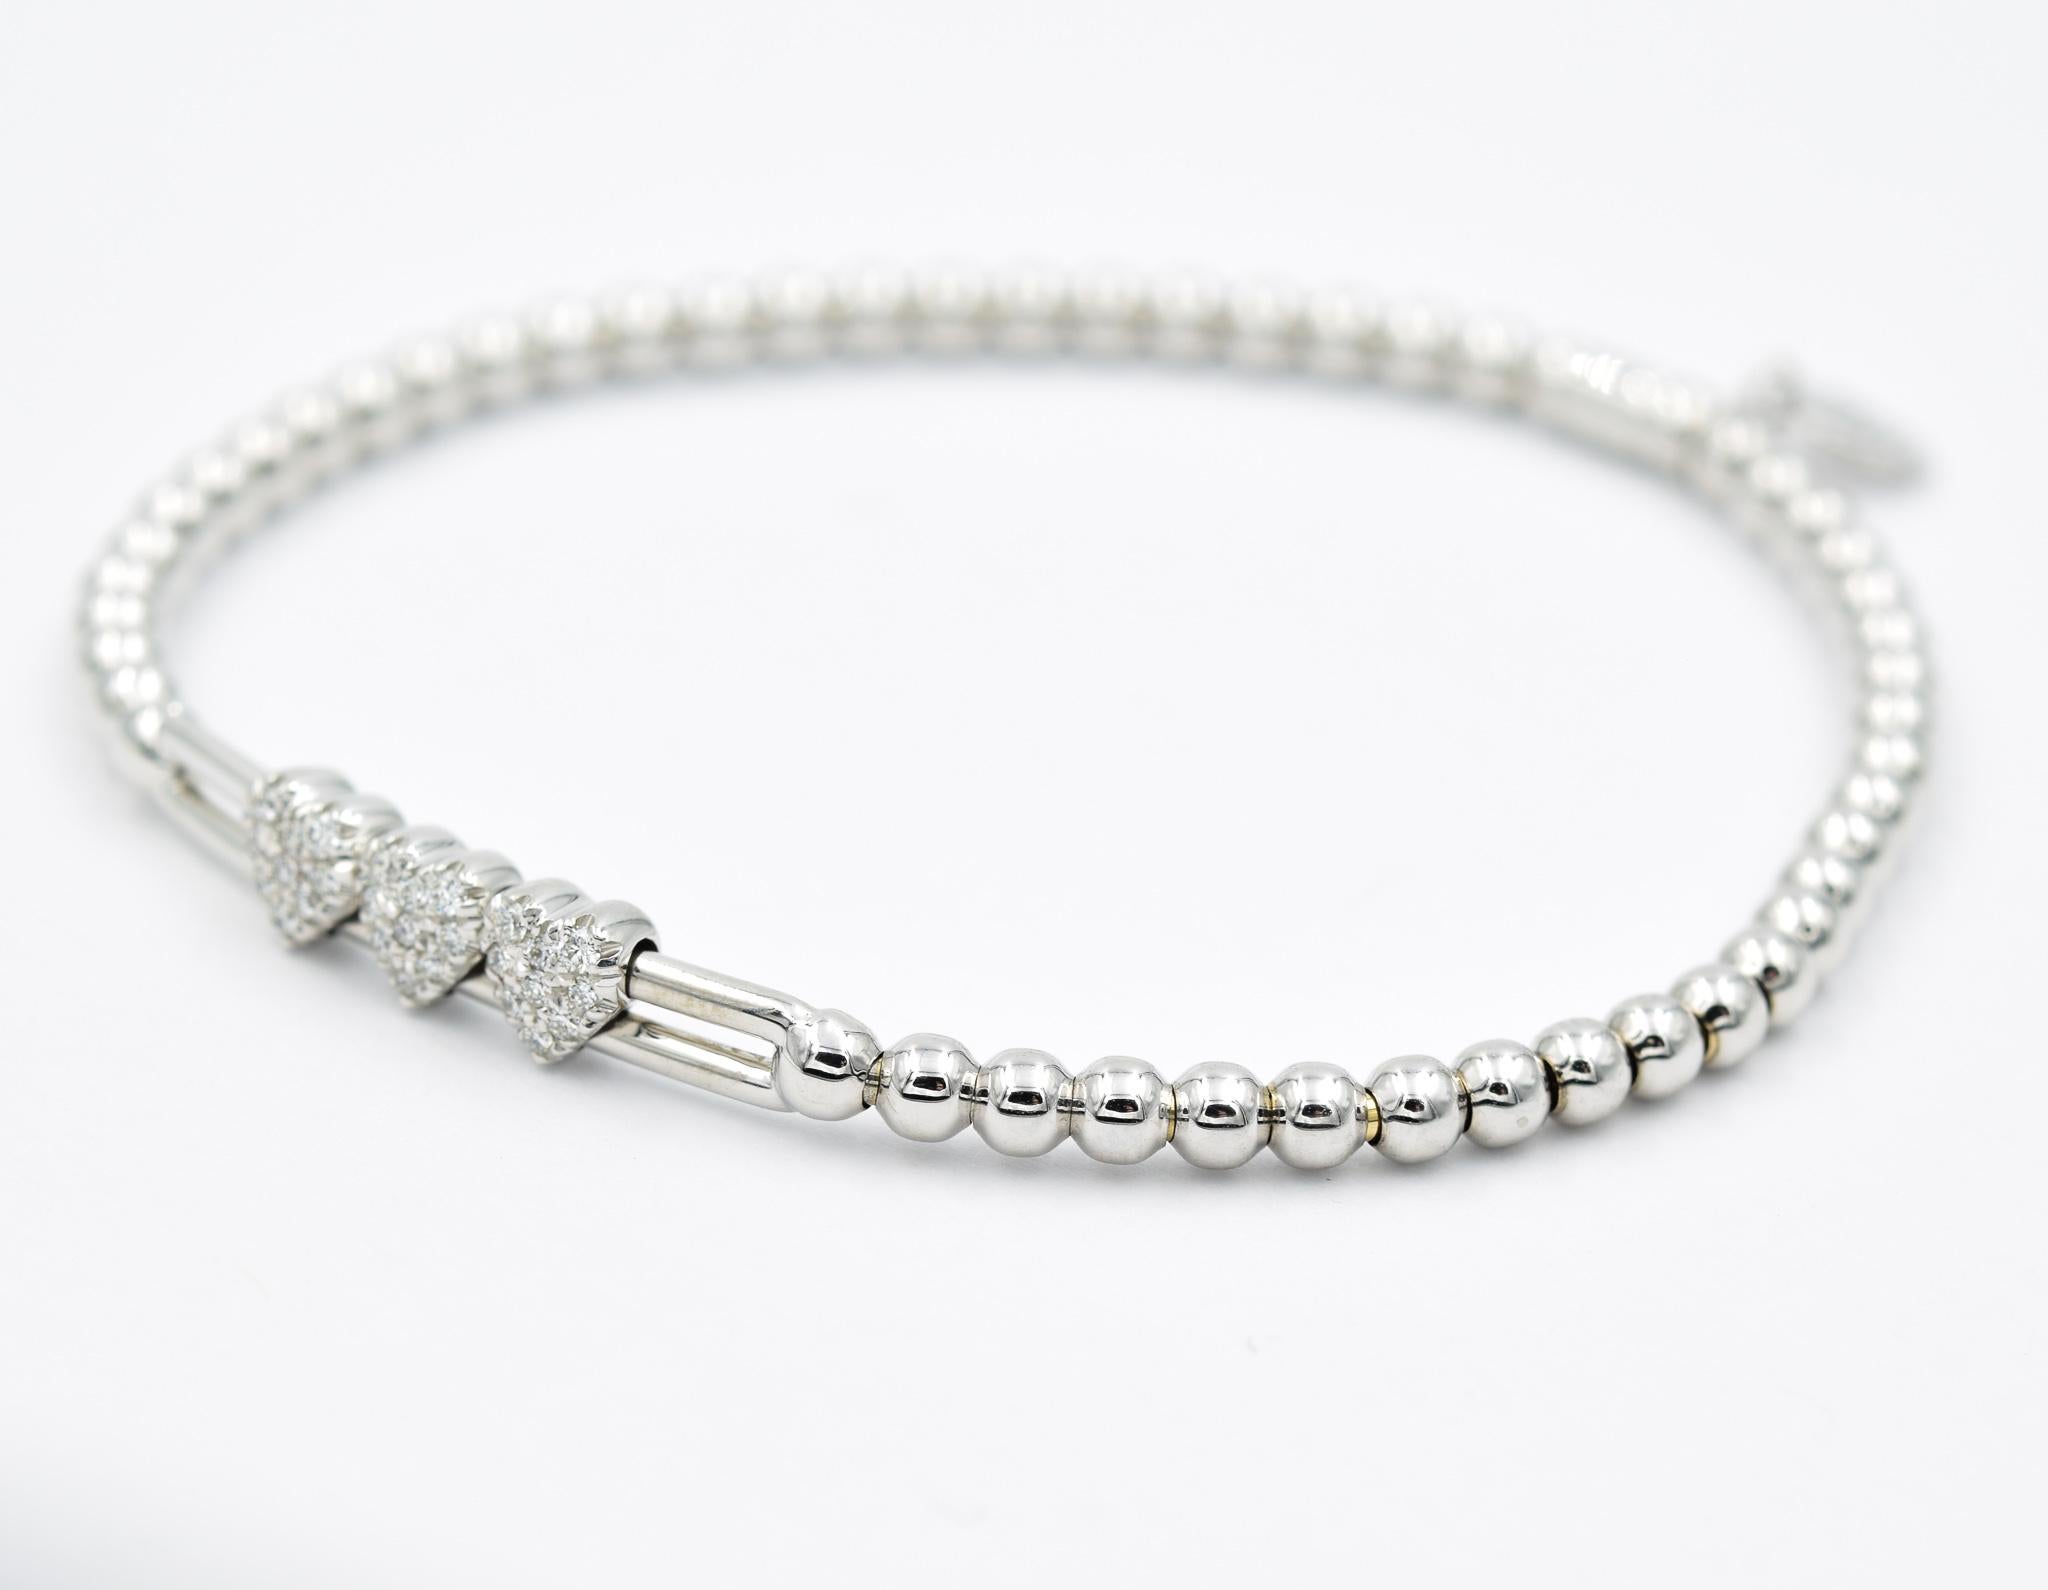 Hulchi Belluni stretchable diamond pavé heart station bracelet from the Tresore Collection in 18k white gold set with high quality white diamonds. Also available in yellow gold. 

0.23ctw of Diamonds 
Beaded & stretchable for extra comfort & style